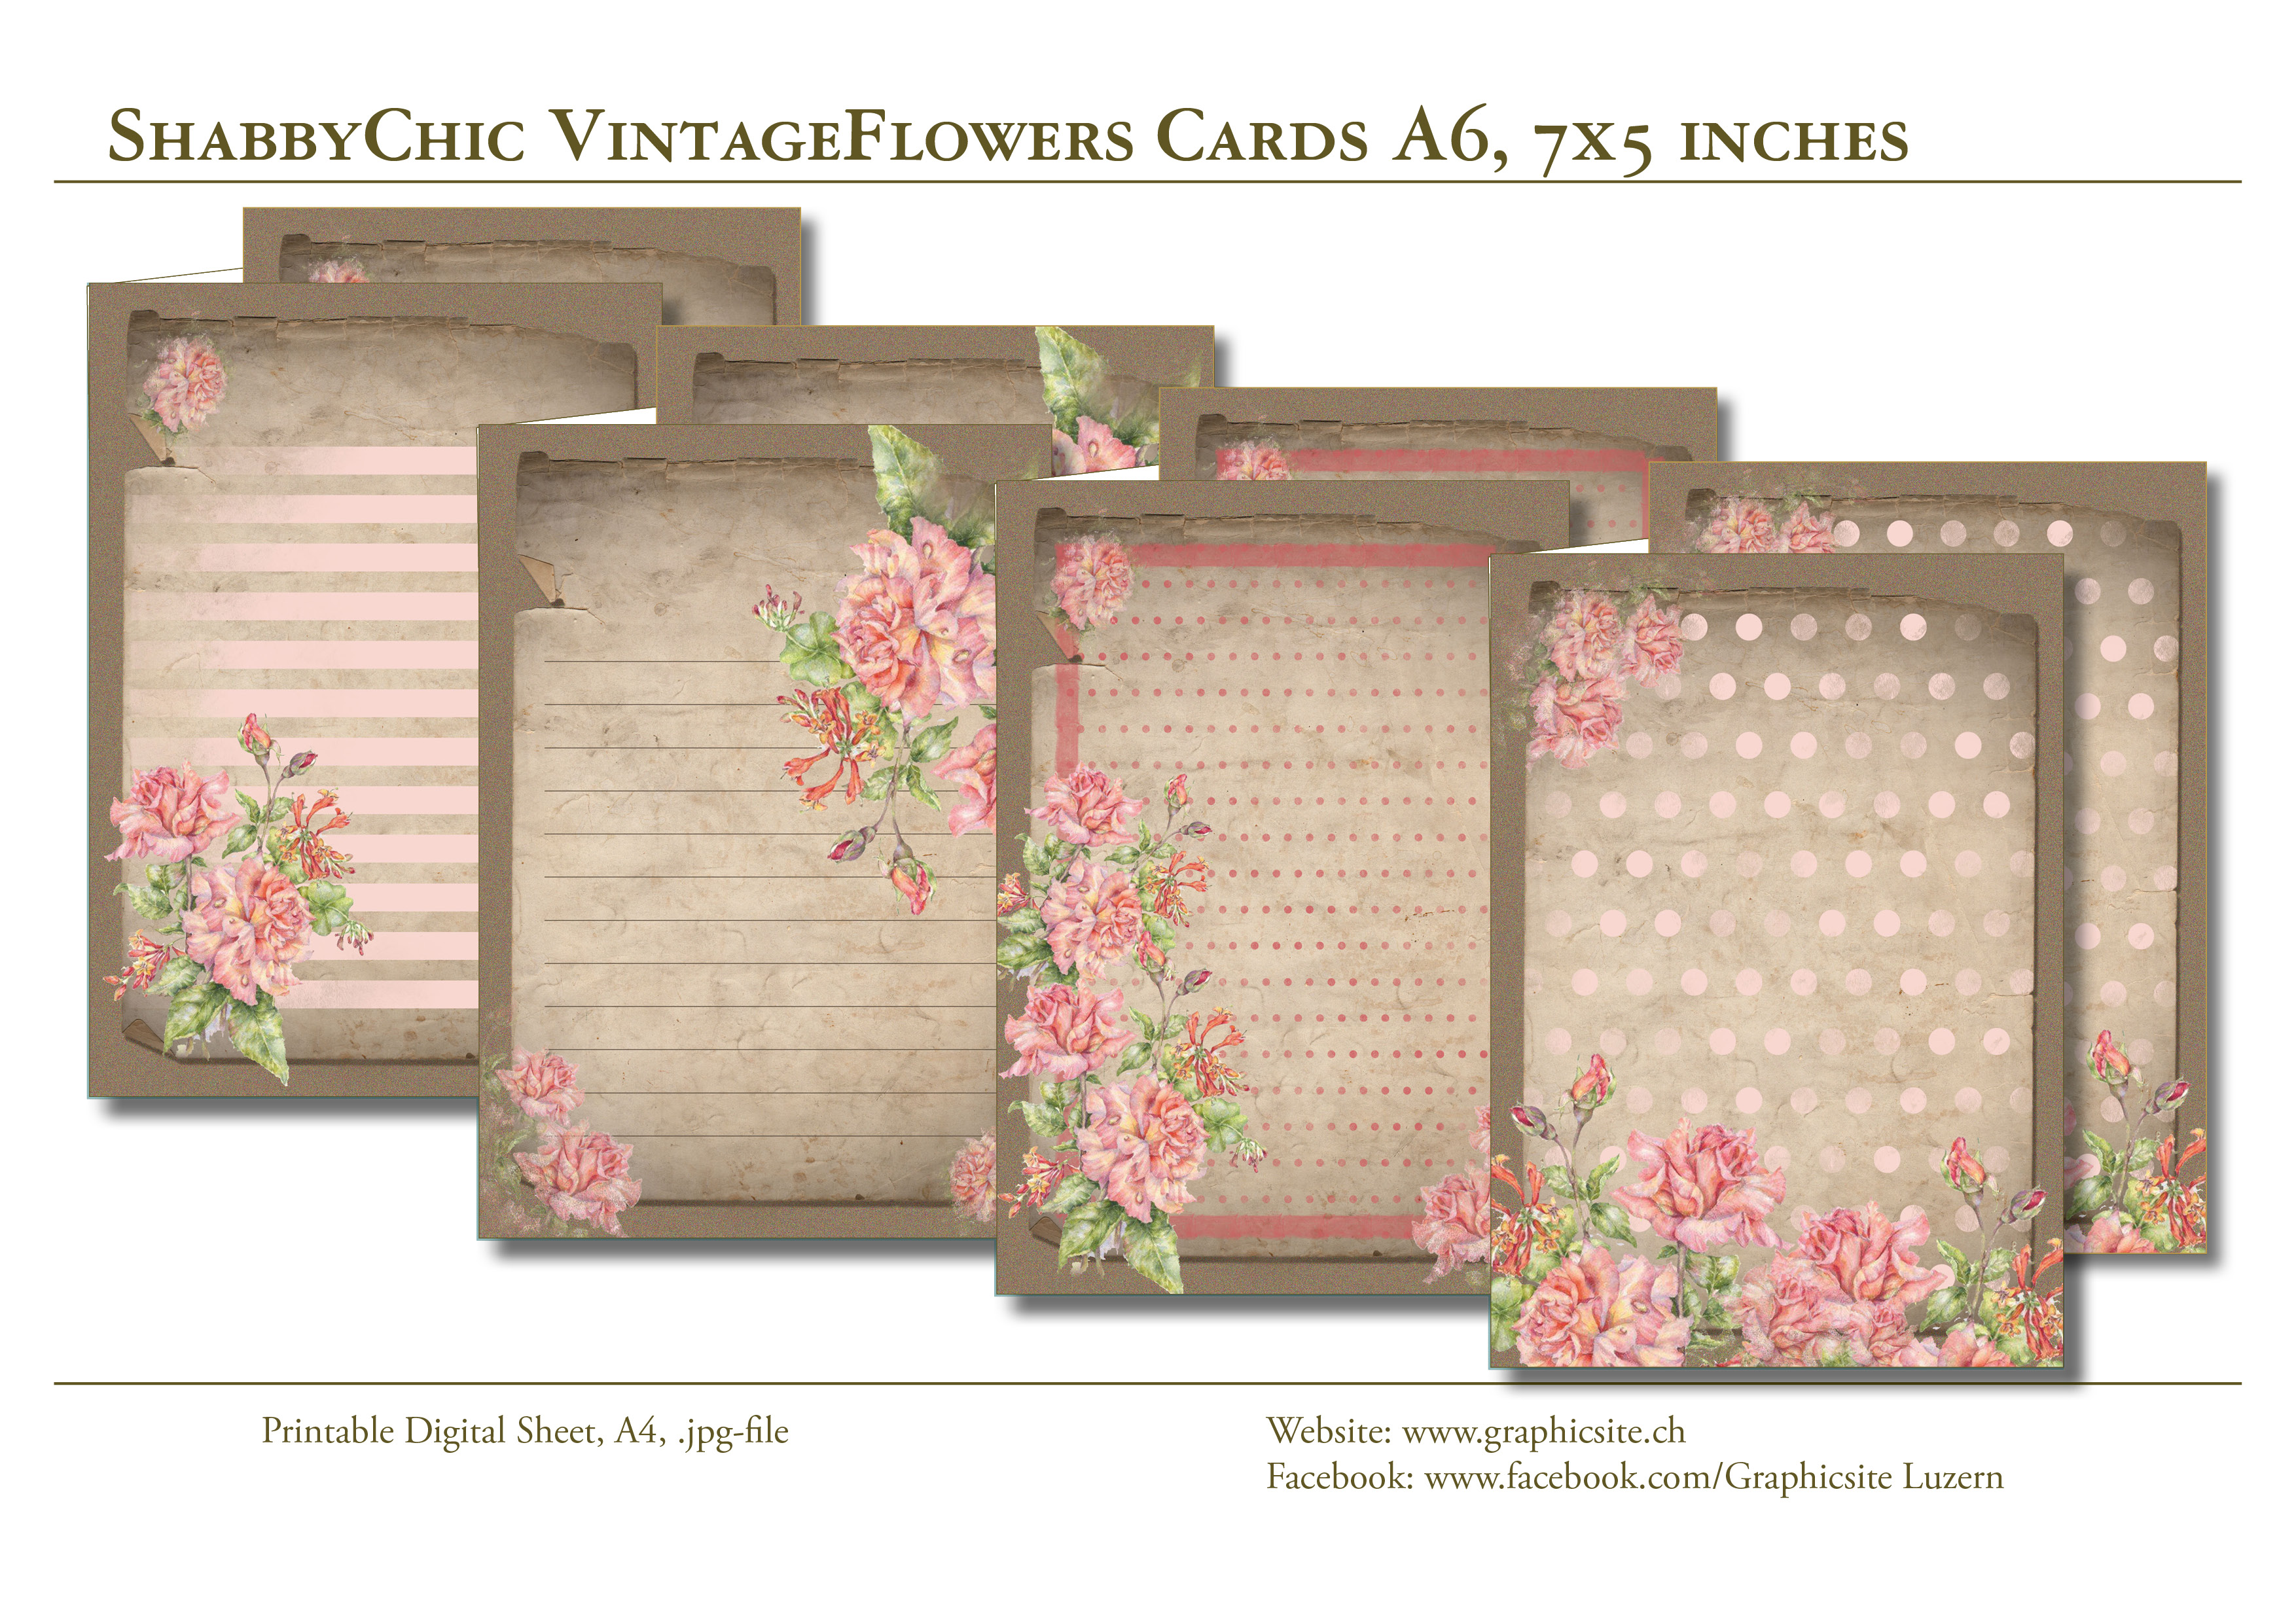 Printable Digital Sheets - Greeting Cards, CardCollection, Flowers, Vintage, ShabbyChic, Rose, Graphic Design, Luzern,